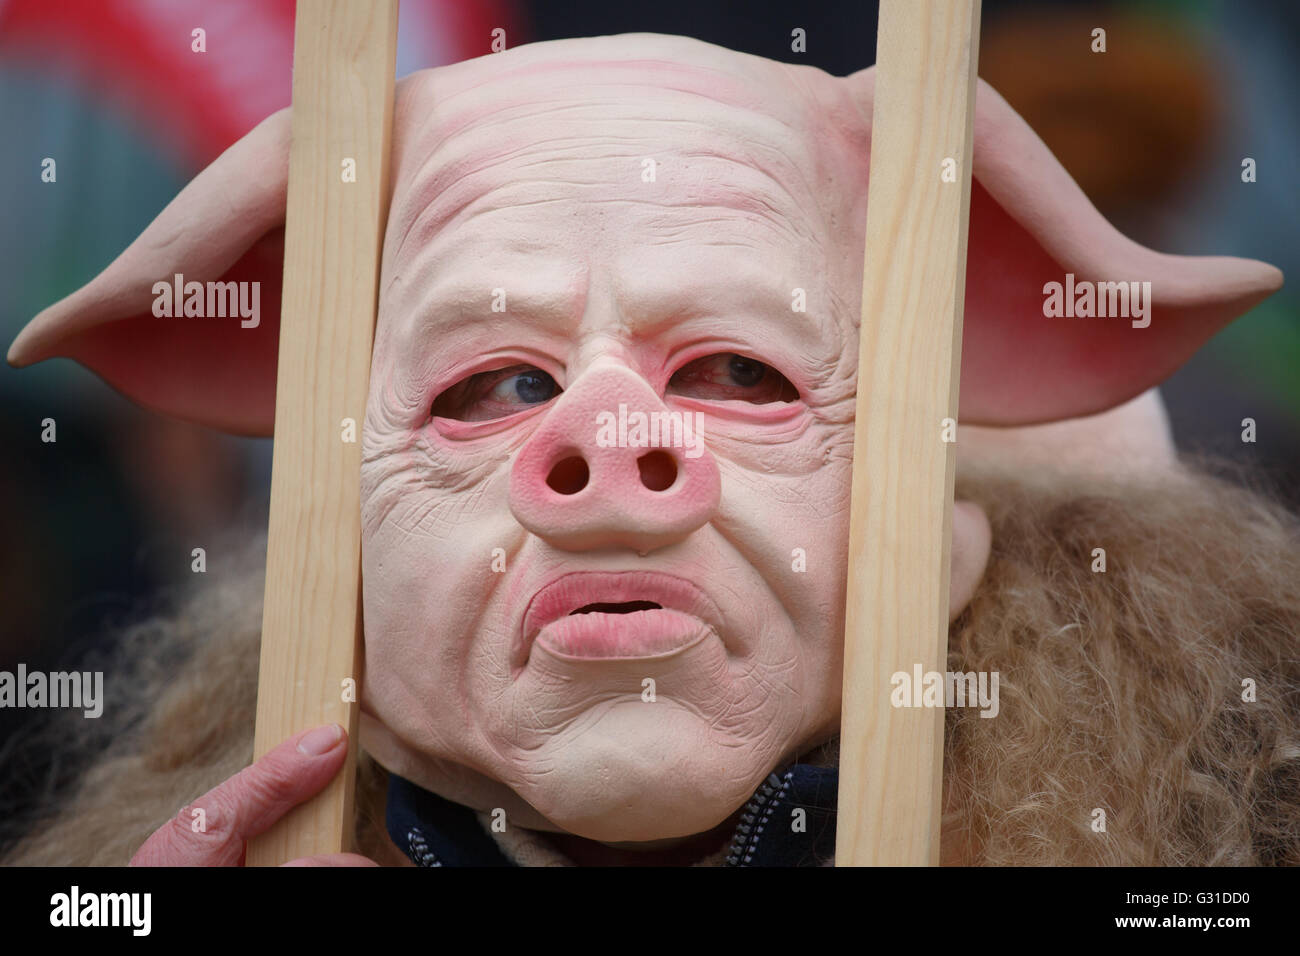 Berlin, Germany, Protest against factory farming Stock Photo